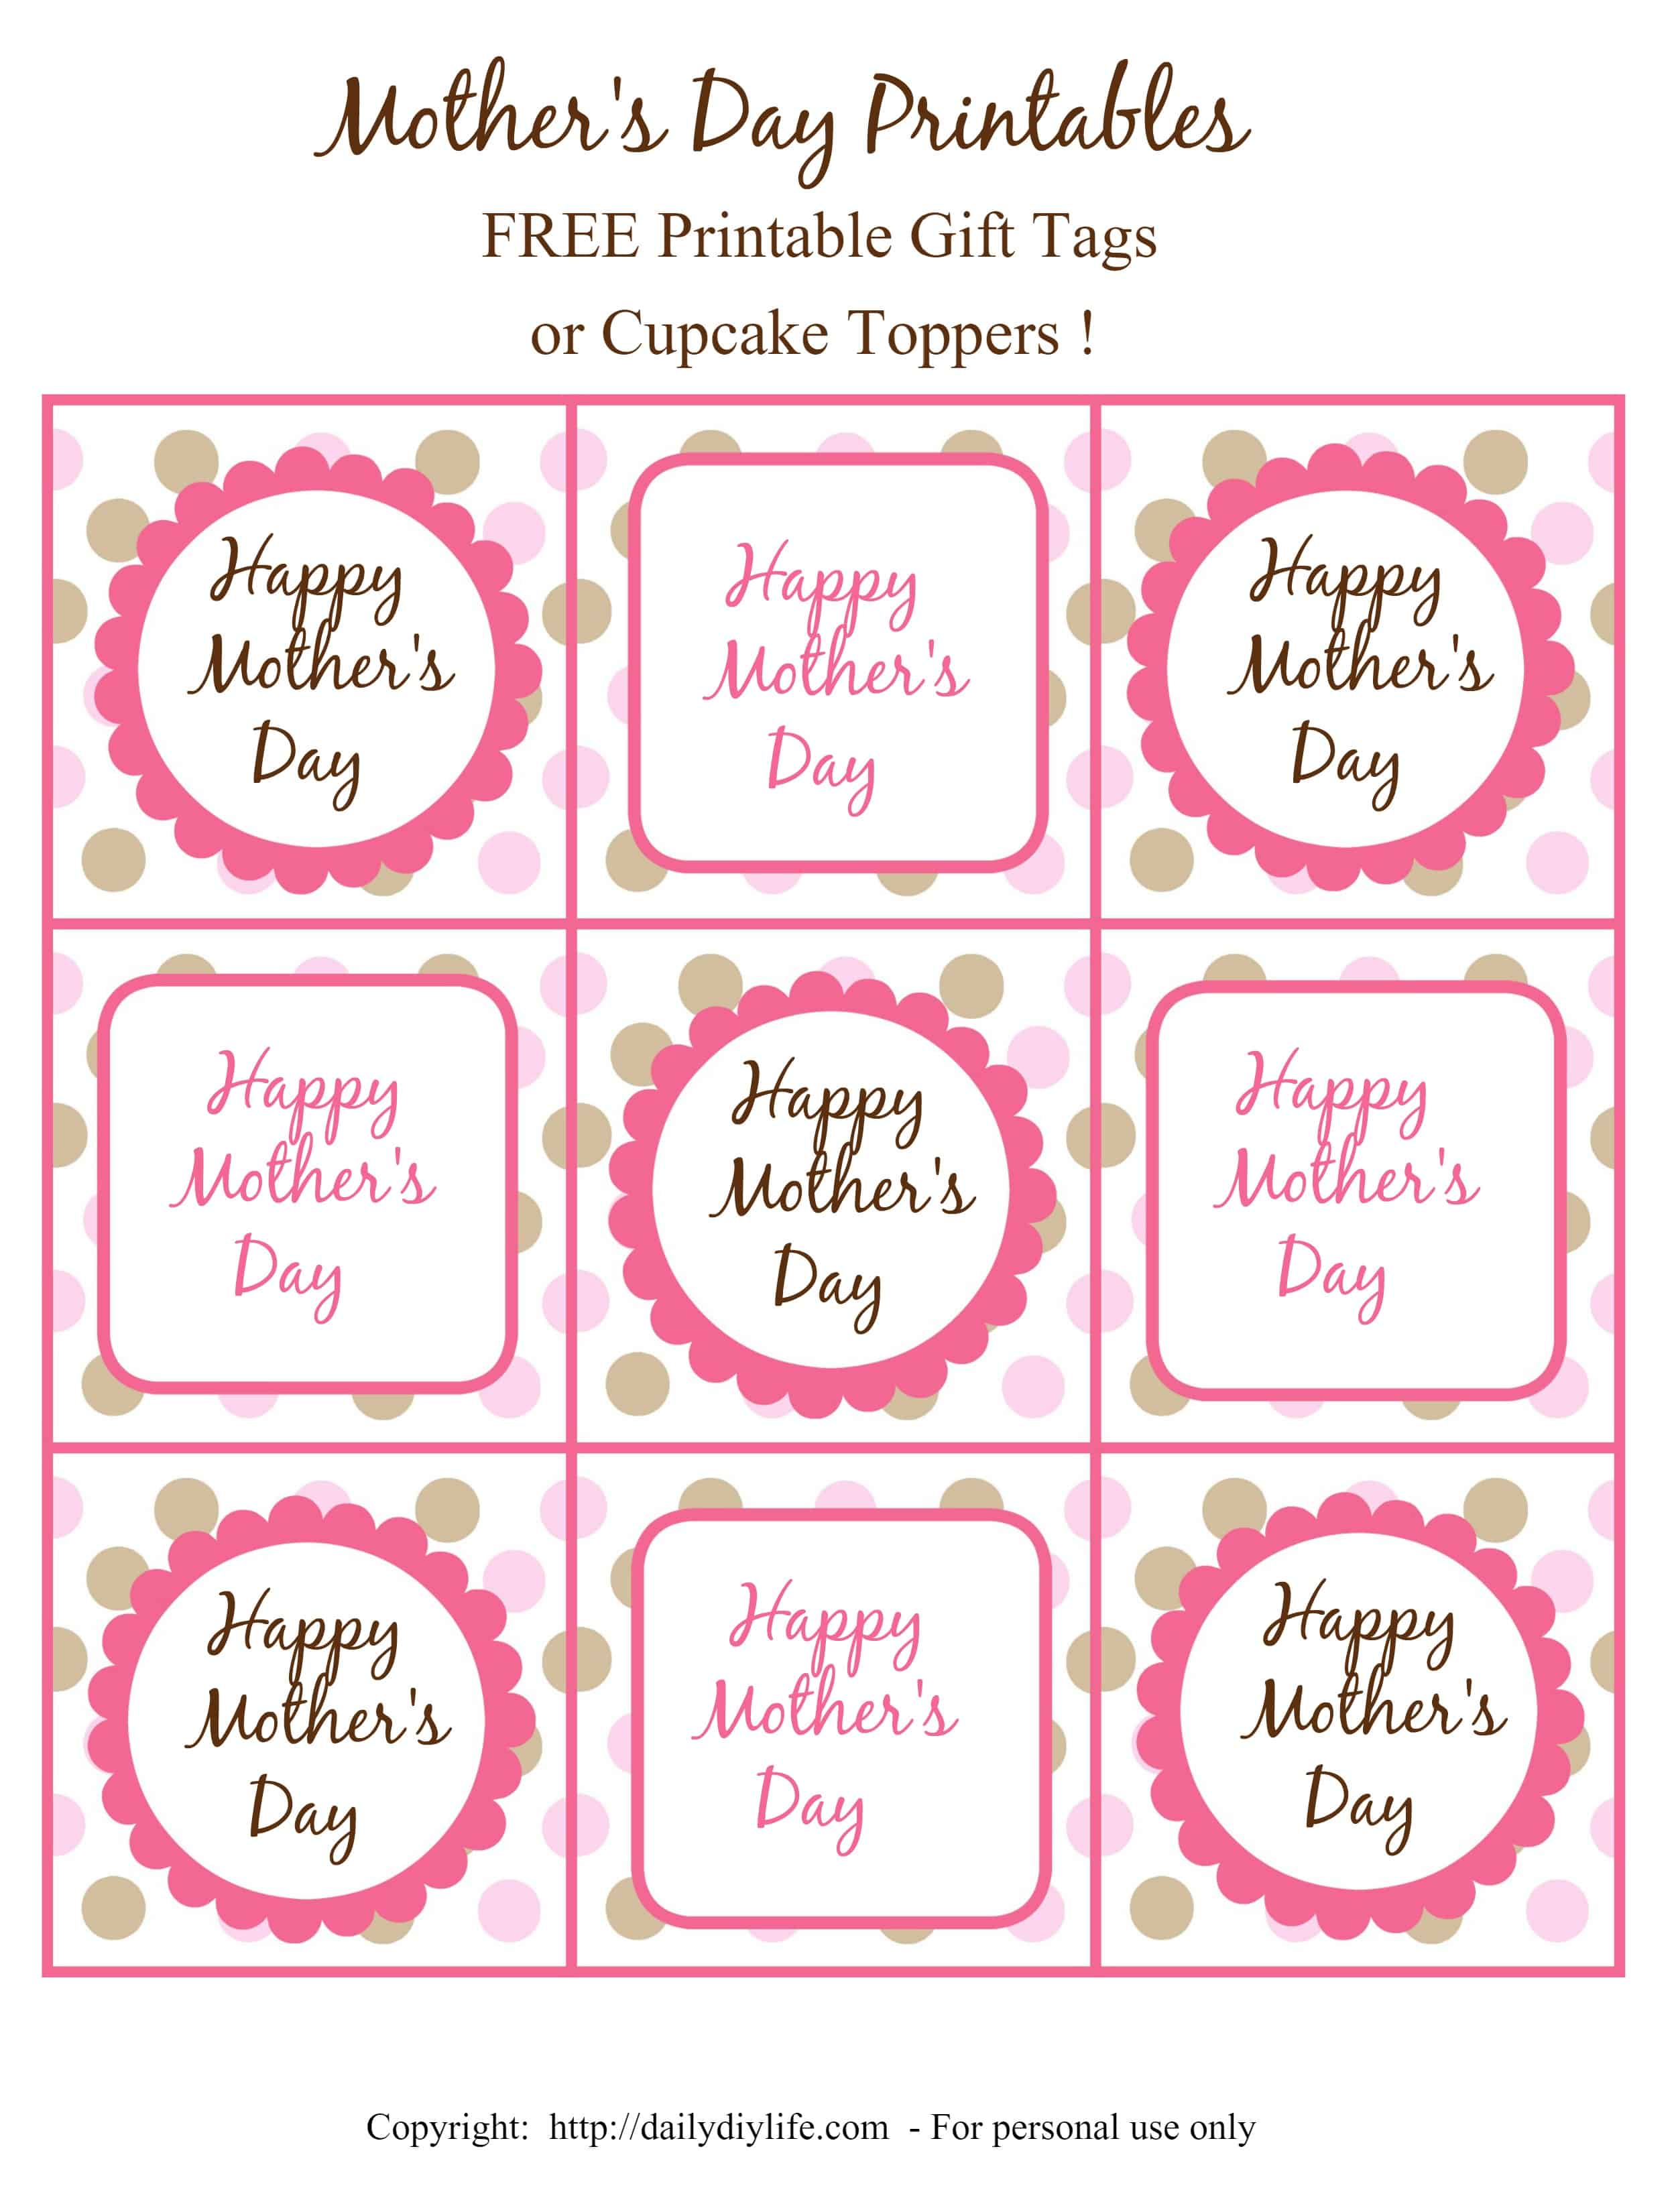 Mother's Day FREE Printable Gift Tags or Cupcake Toppers